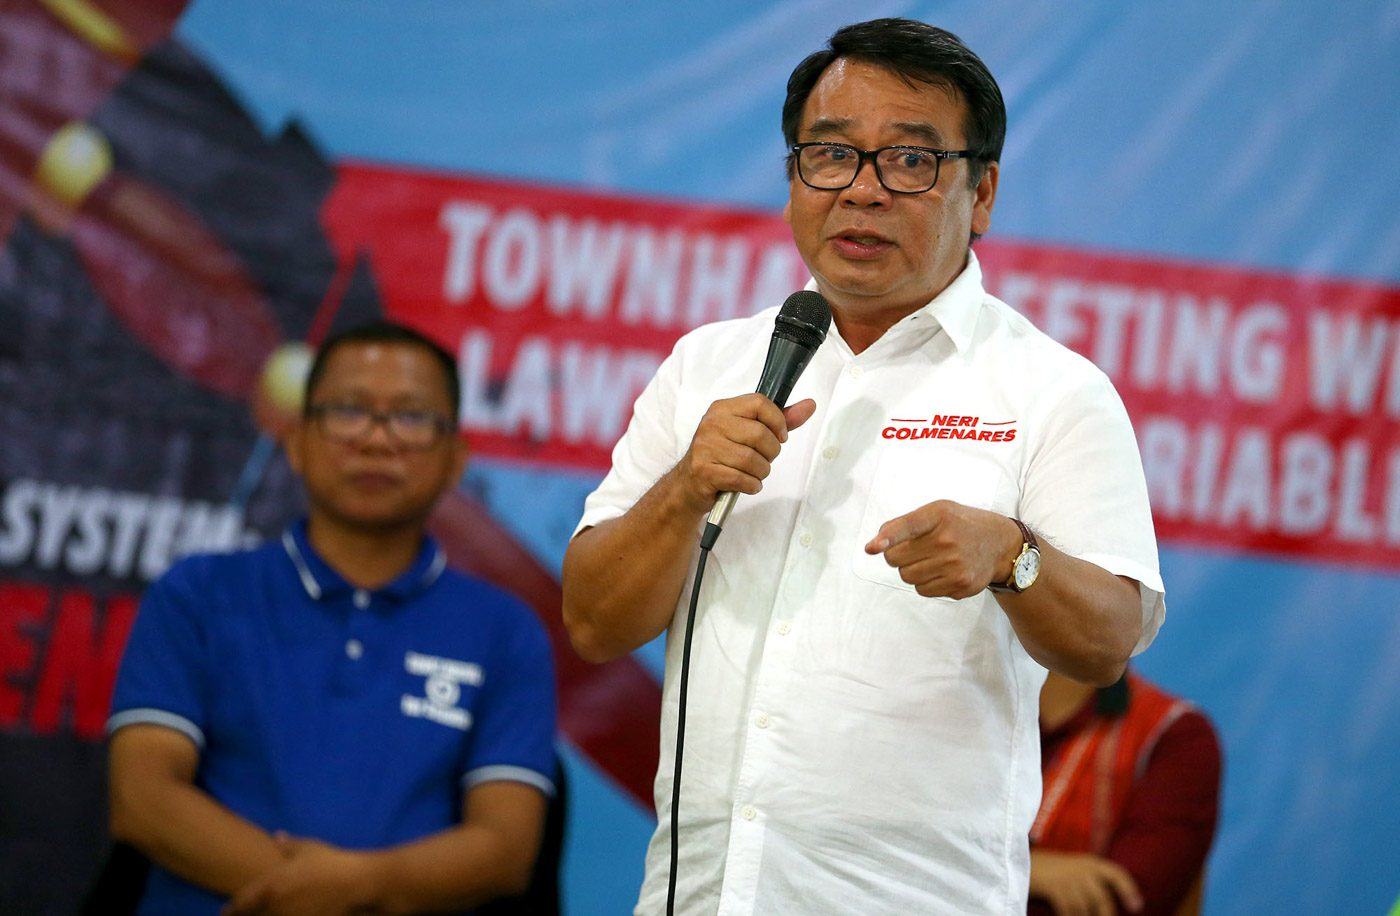 Colmenares: Solve impunity by not electing another Duterte